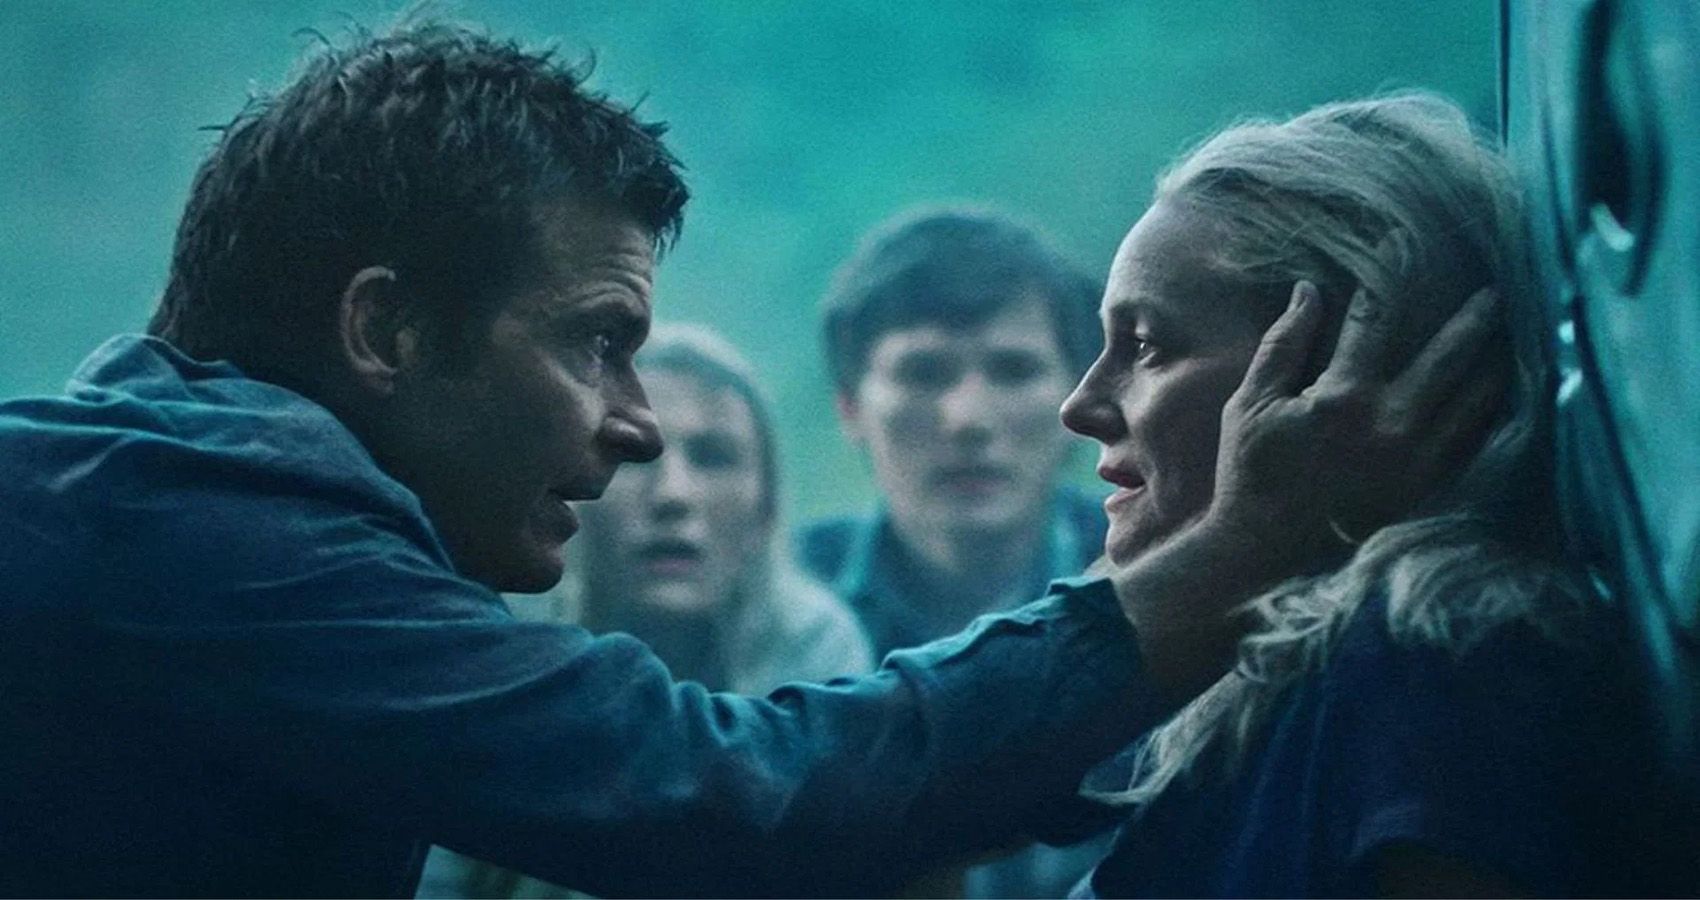 Farewell to Ozark – the most thrilling, rewarding crime show